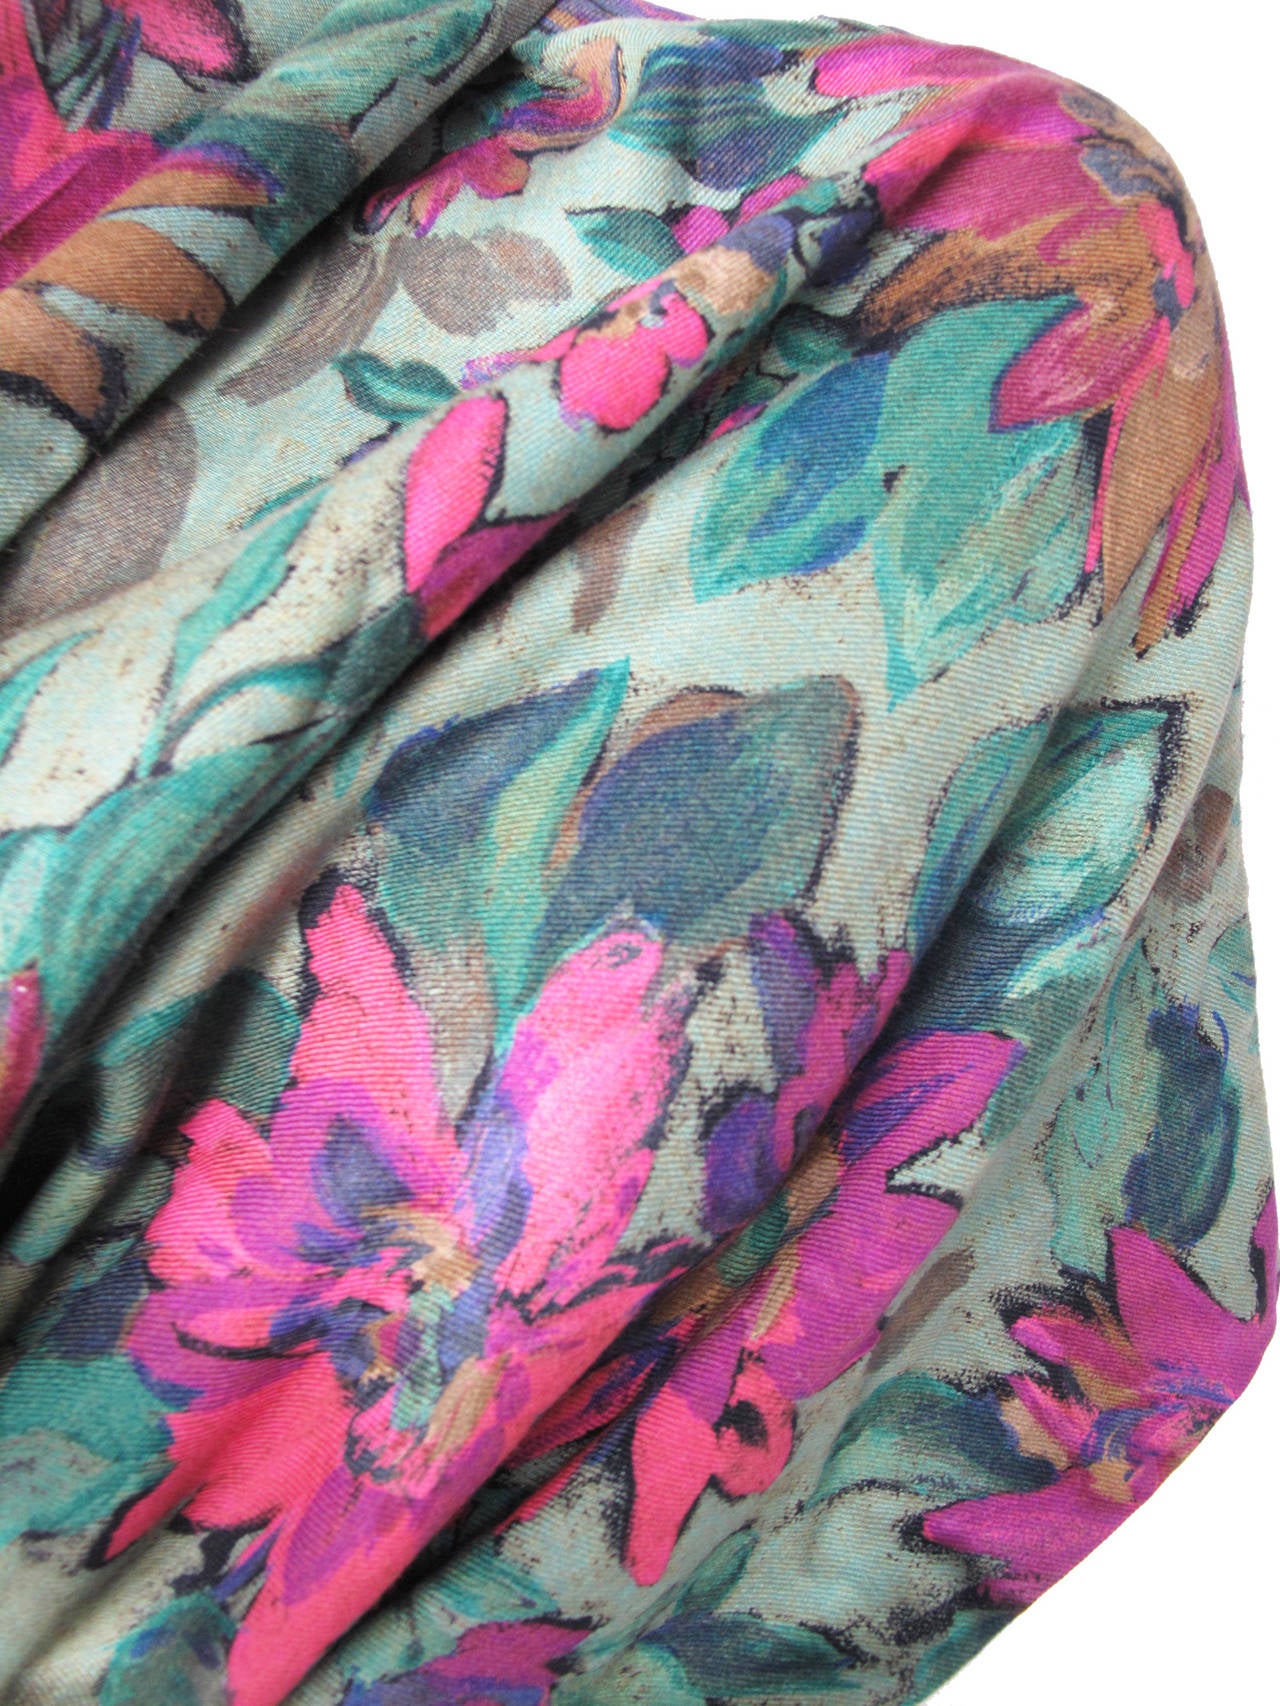 Gorgeous large light wool Ungaro floral shawl with black tassels on ends.  Green, pink, purple, mustard colors.   Condition: Excellent, looks new. 

One size